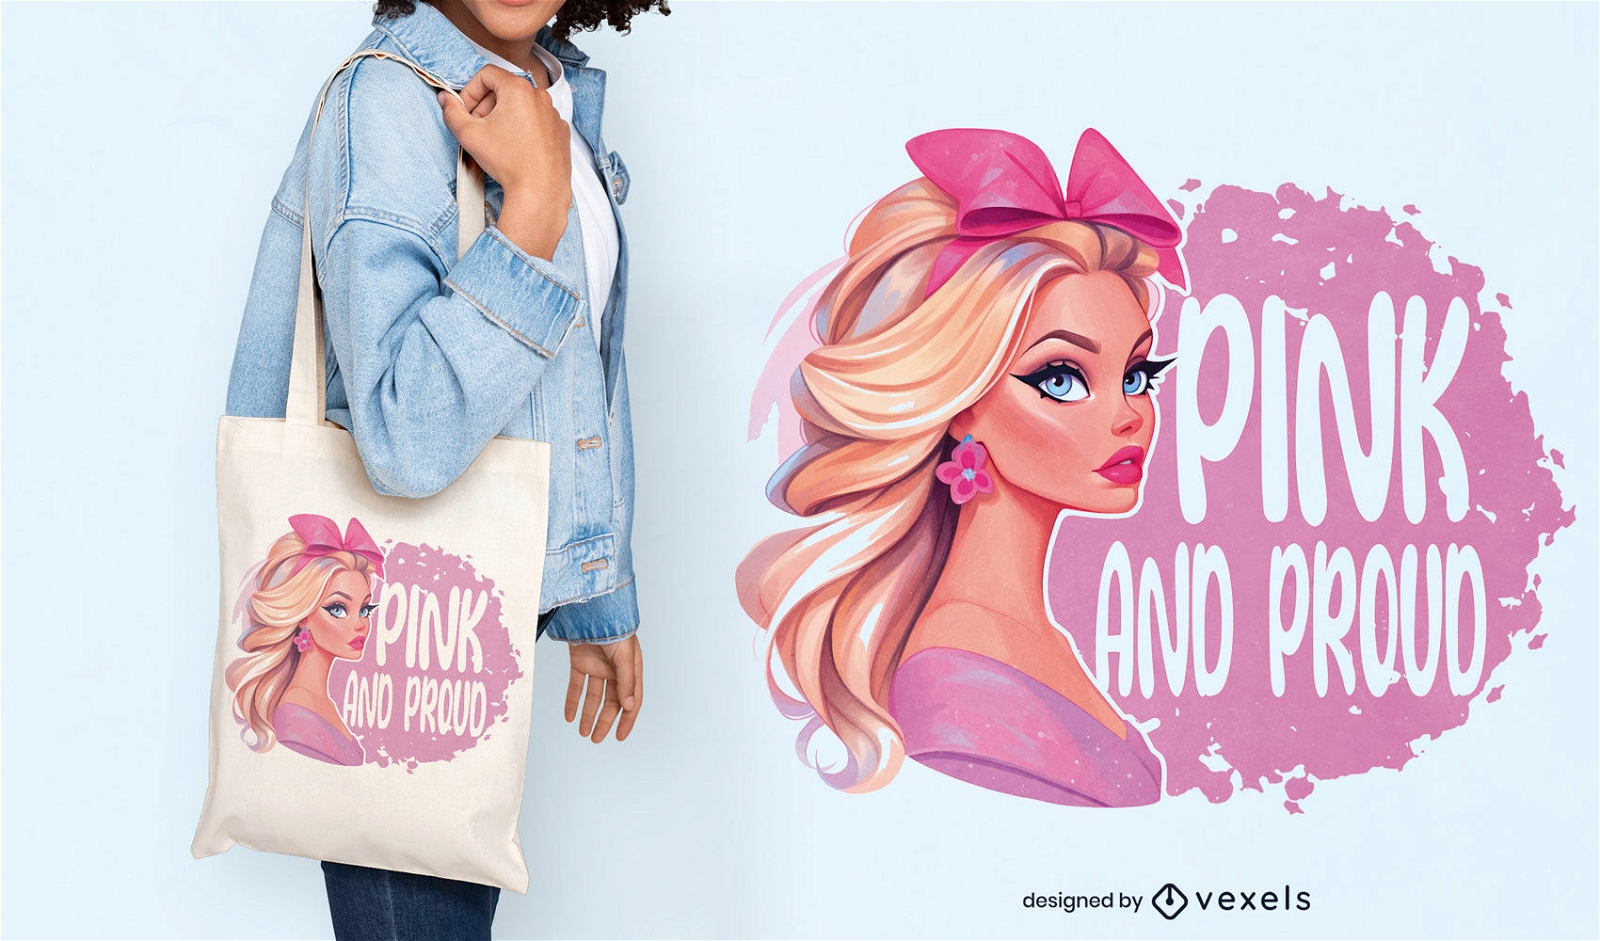 Girly woman in pink tote bag design